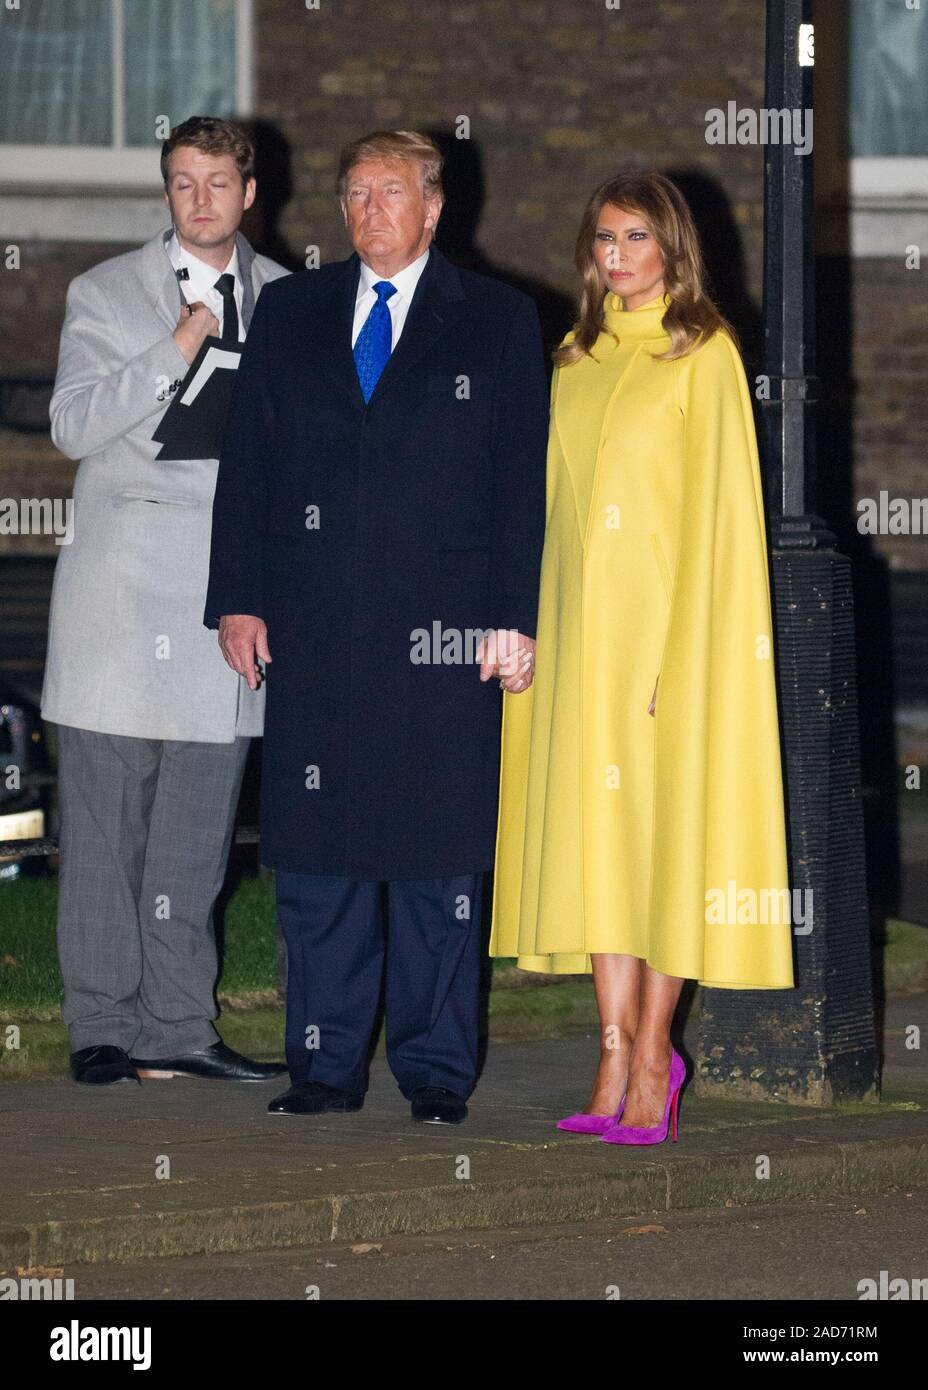 London, UK. 3 December 2019.  Pictured: (centre) Donald J Trump - 45th President of the United Starts of America, (right|) Melania Trump - First Lady. Boris Johnson, UK Prime Minister hosts a reception with foreign leaders ahead of the NATO (North Atlantic Treaty Organisation) meeting on the 4th December. Credit: Colin Fisher/Alamy Live News Stock Photo